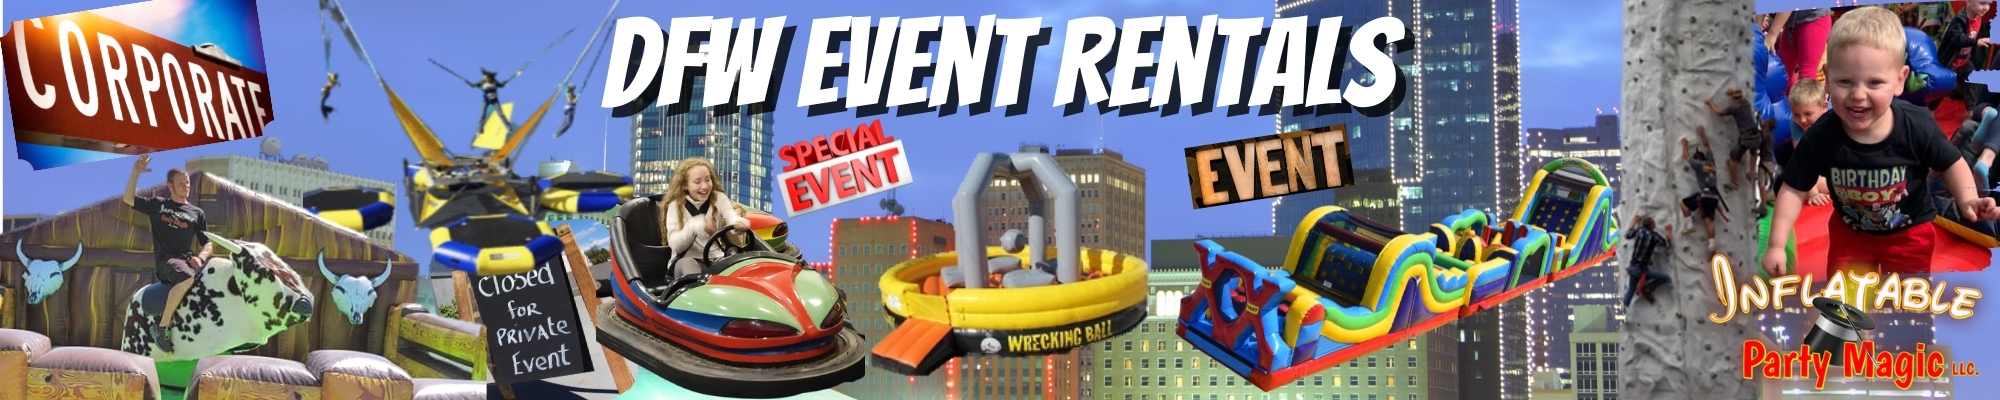 DFW Bounce House Rentals and Event Rentals DFW